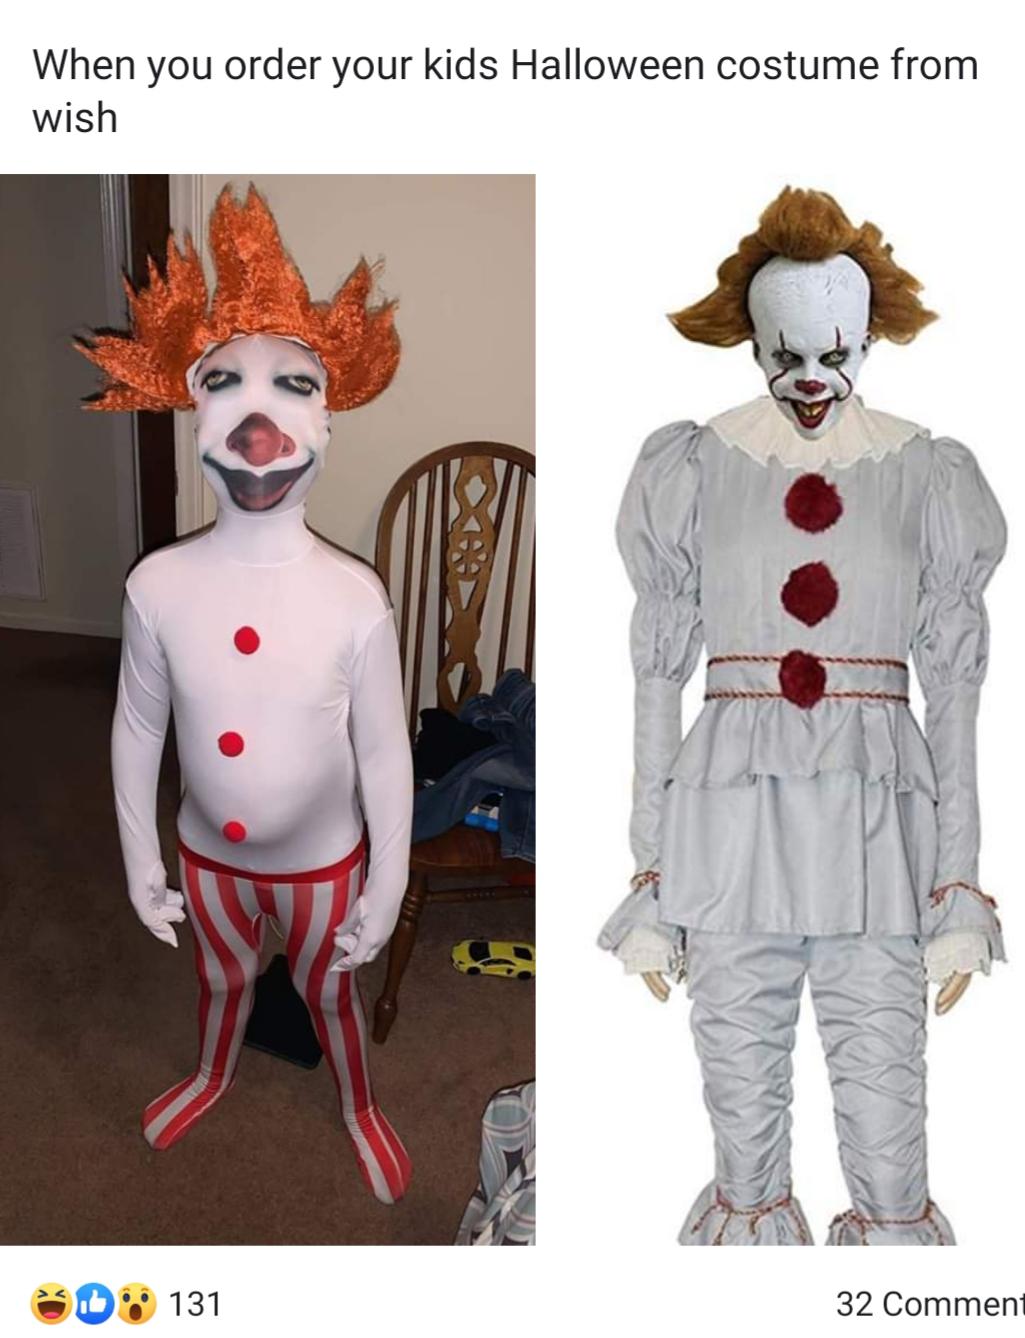 head - When you order your kids Halloween costume from wish 30% 131 32 Comment